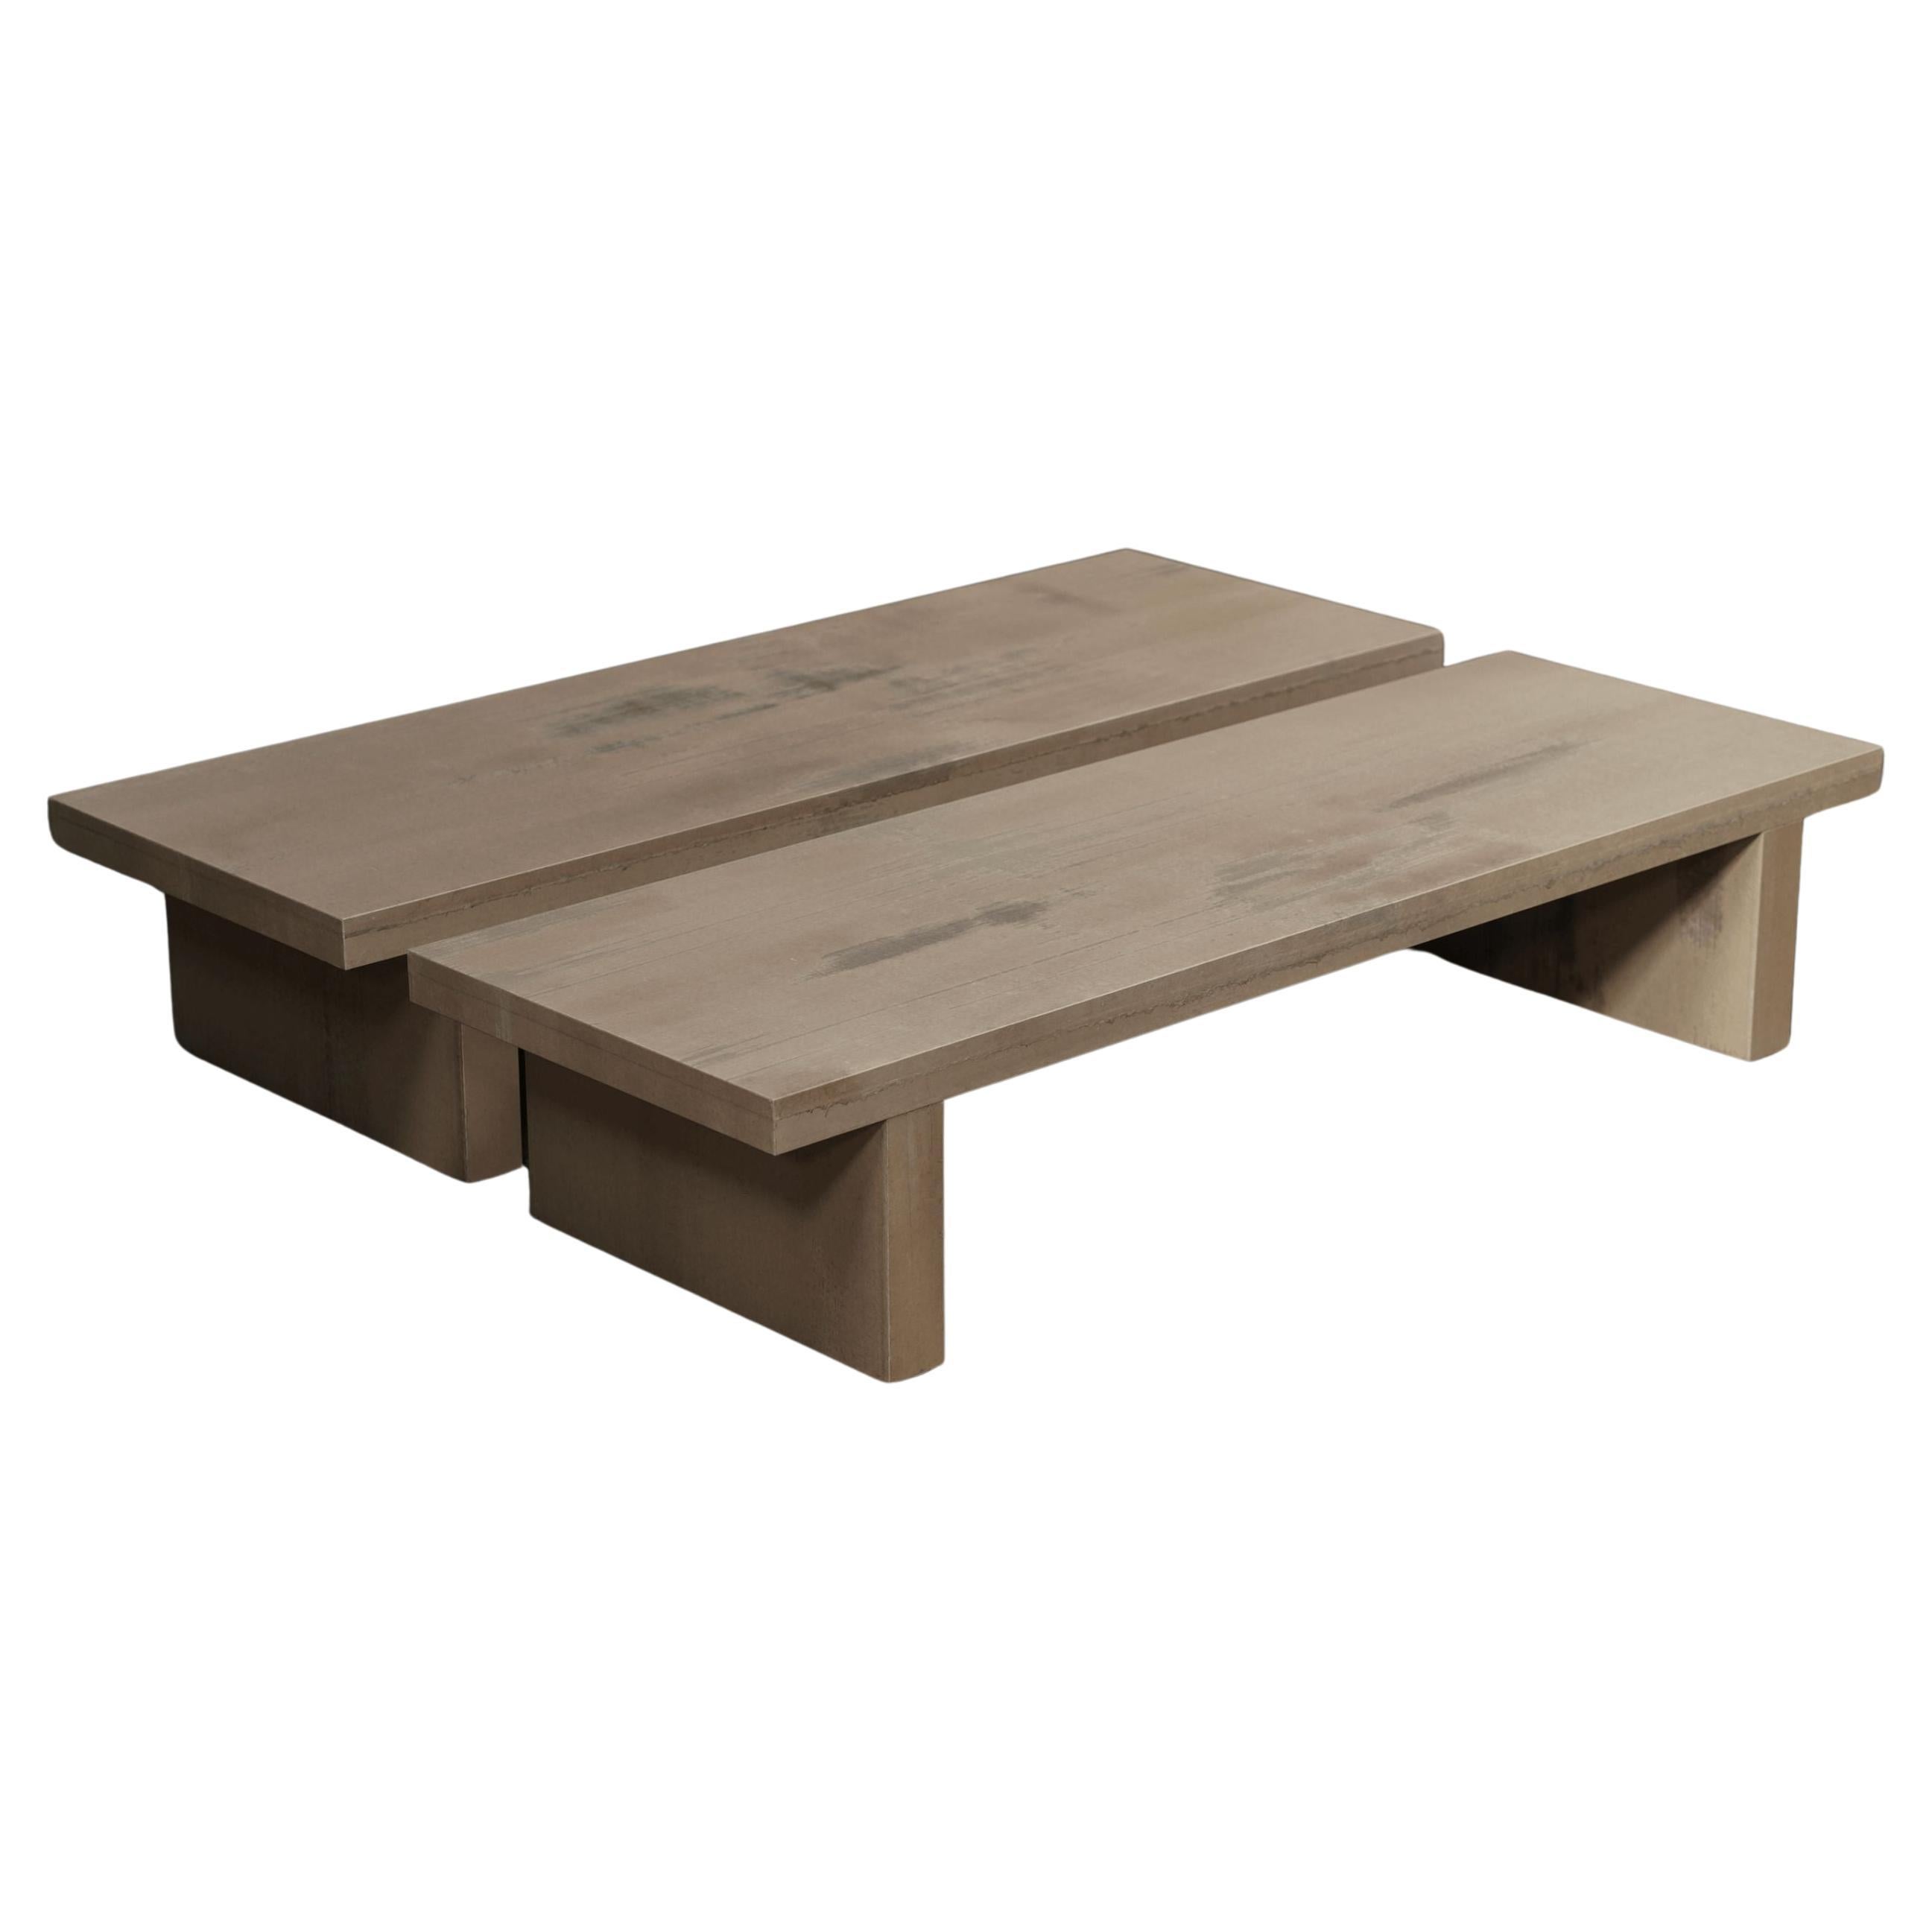 Rectangular Paper Coffee Table, Bone For Sale